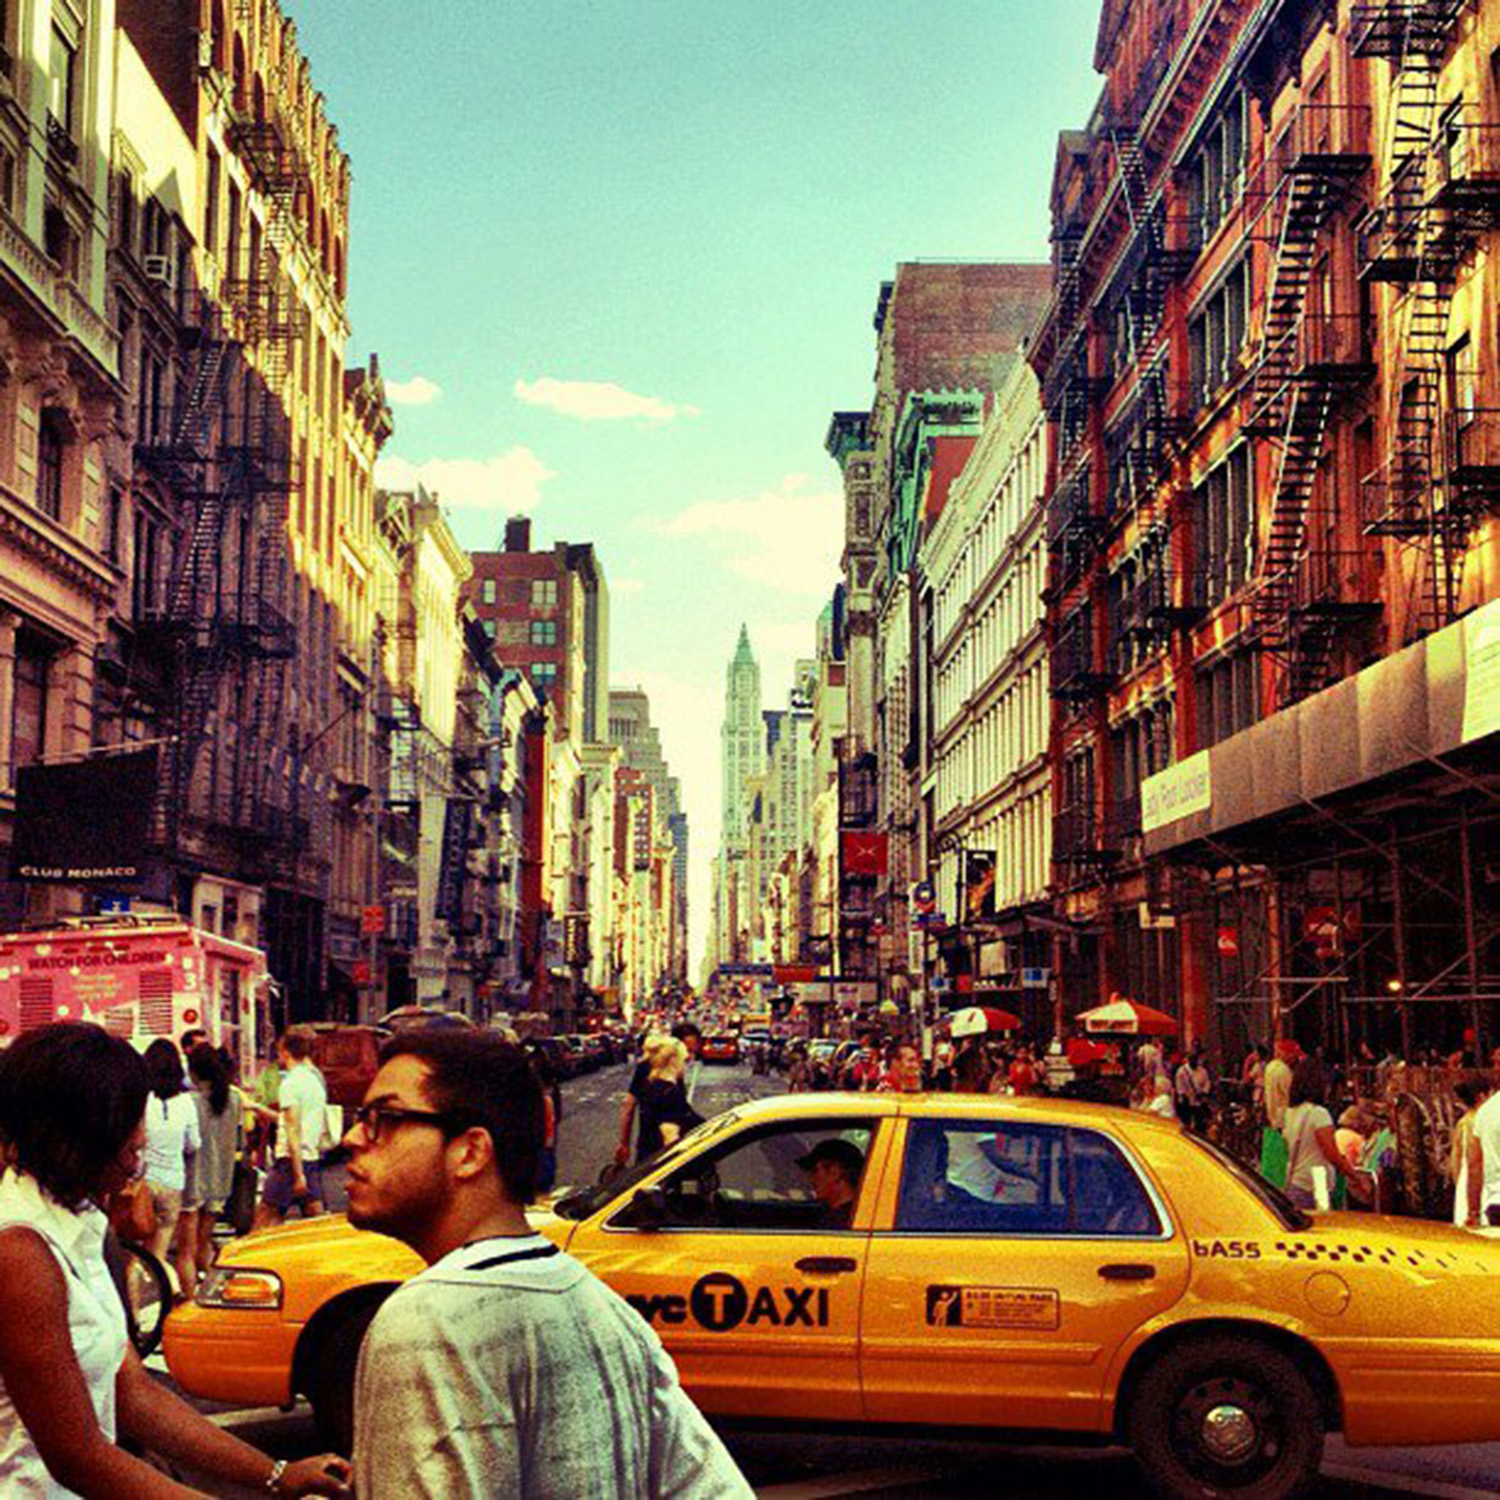 A busy Saturday on a street in Soho. June 2012